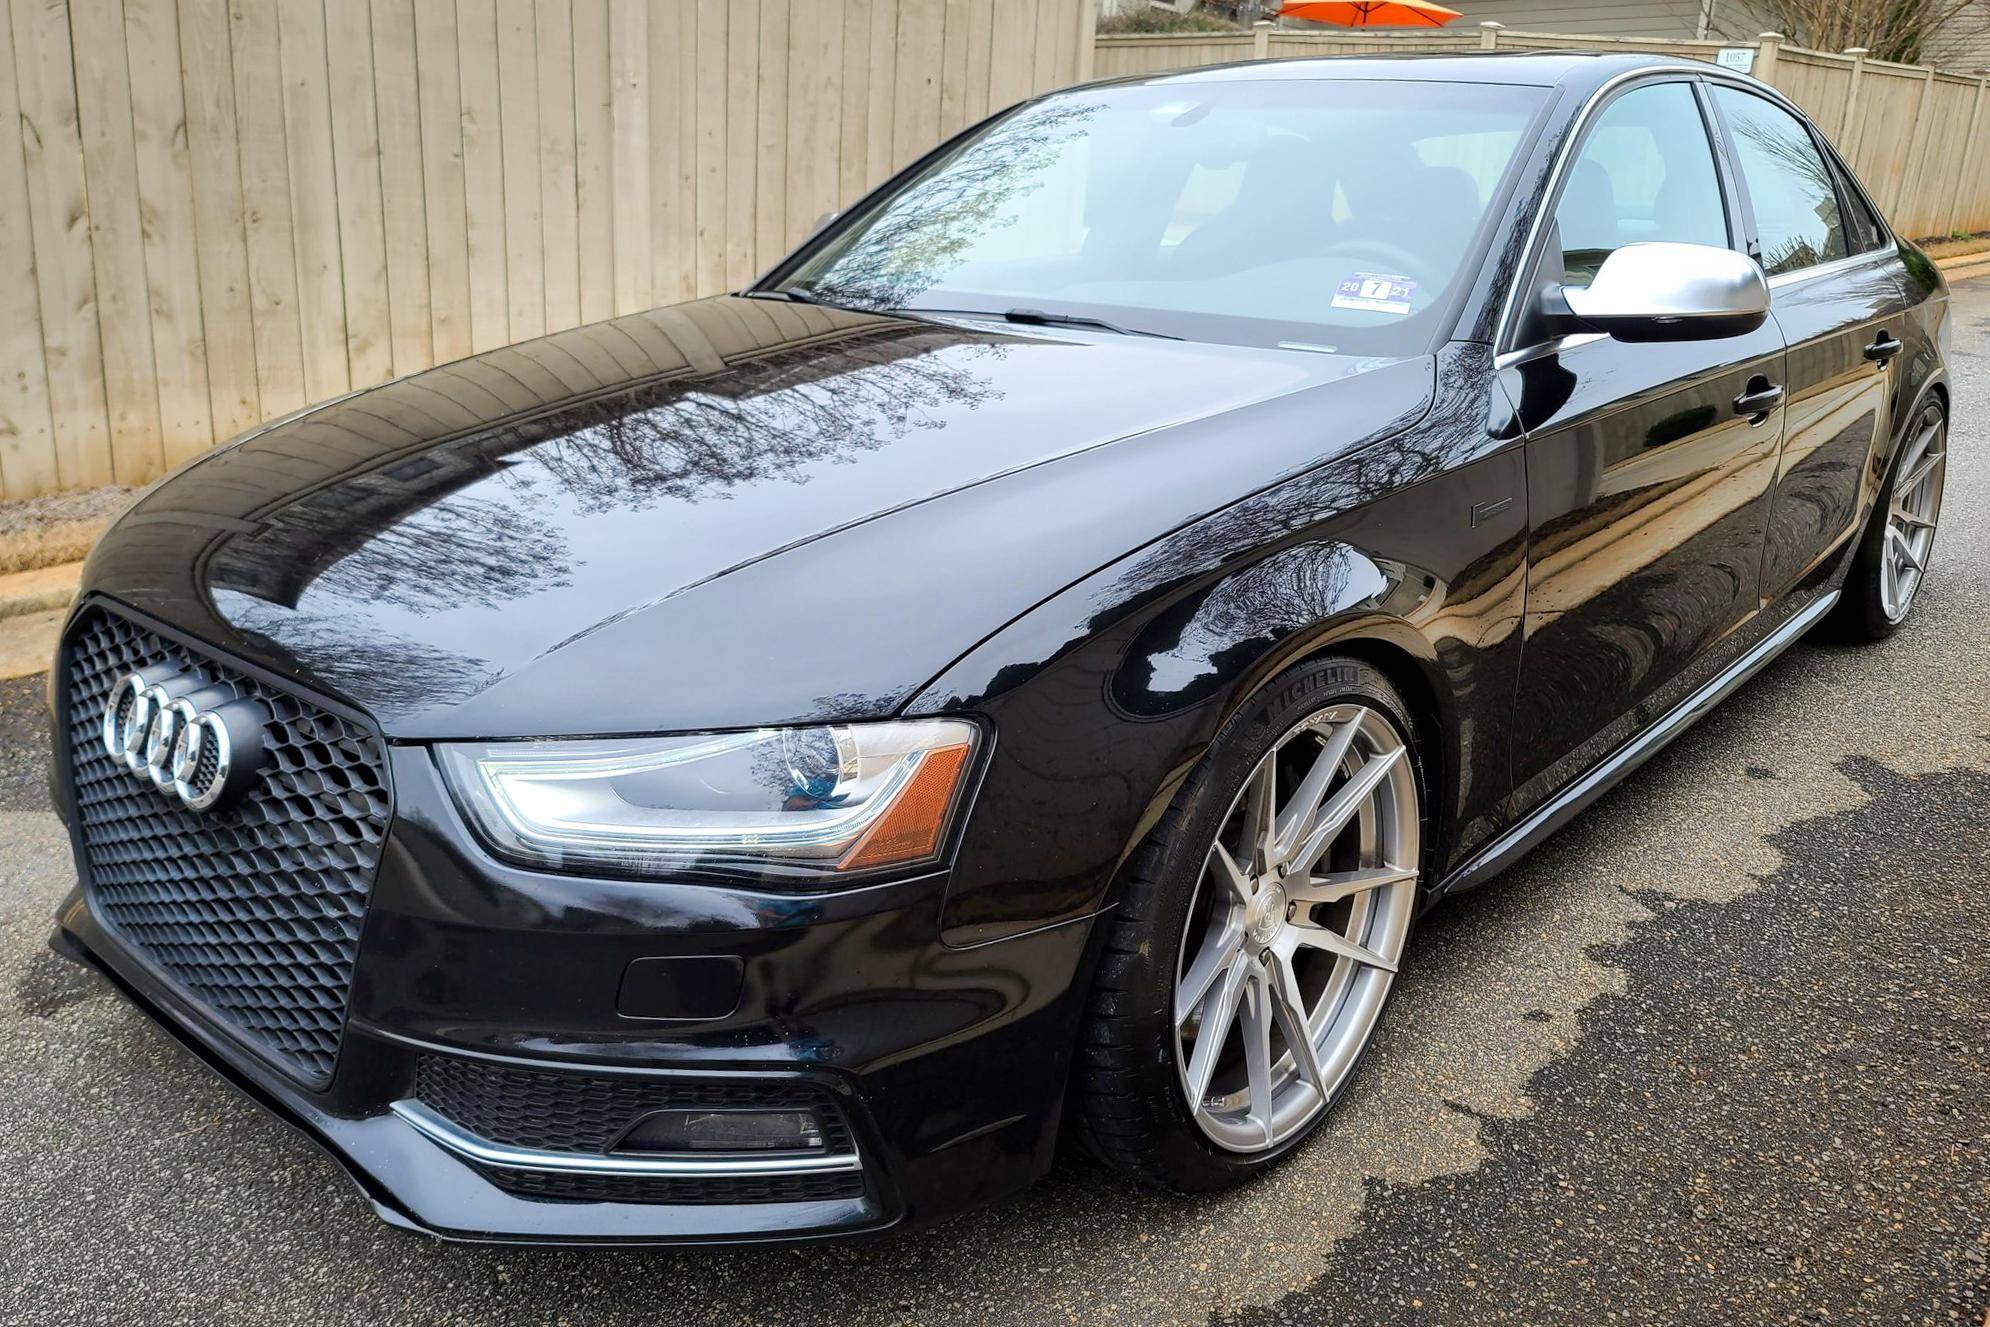 Clean OEM+ Audi A4 B8 With Subtle Mods and Air Suspension 